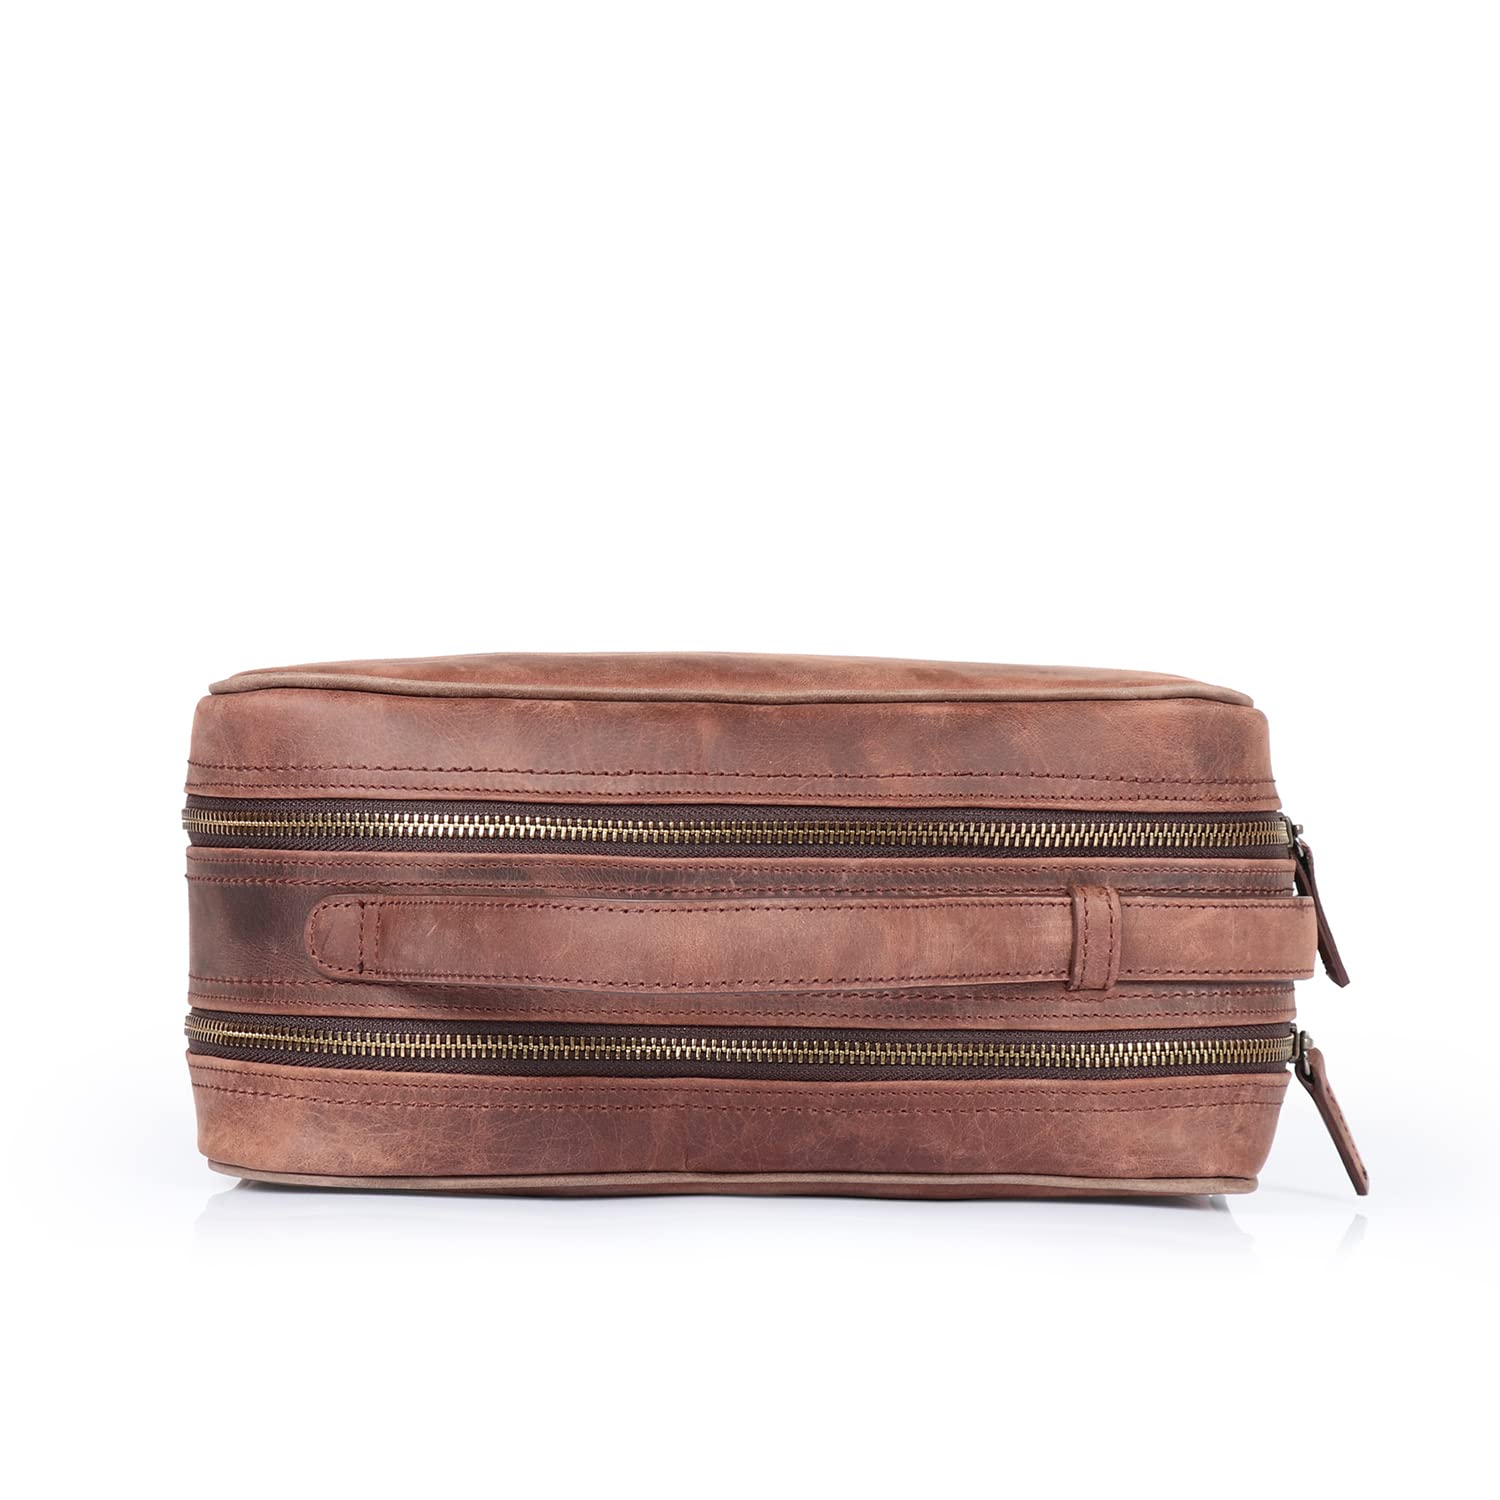 Londo Two Compartment Genuine Leather Travel Bag - Unisex (Brown)